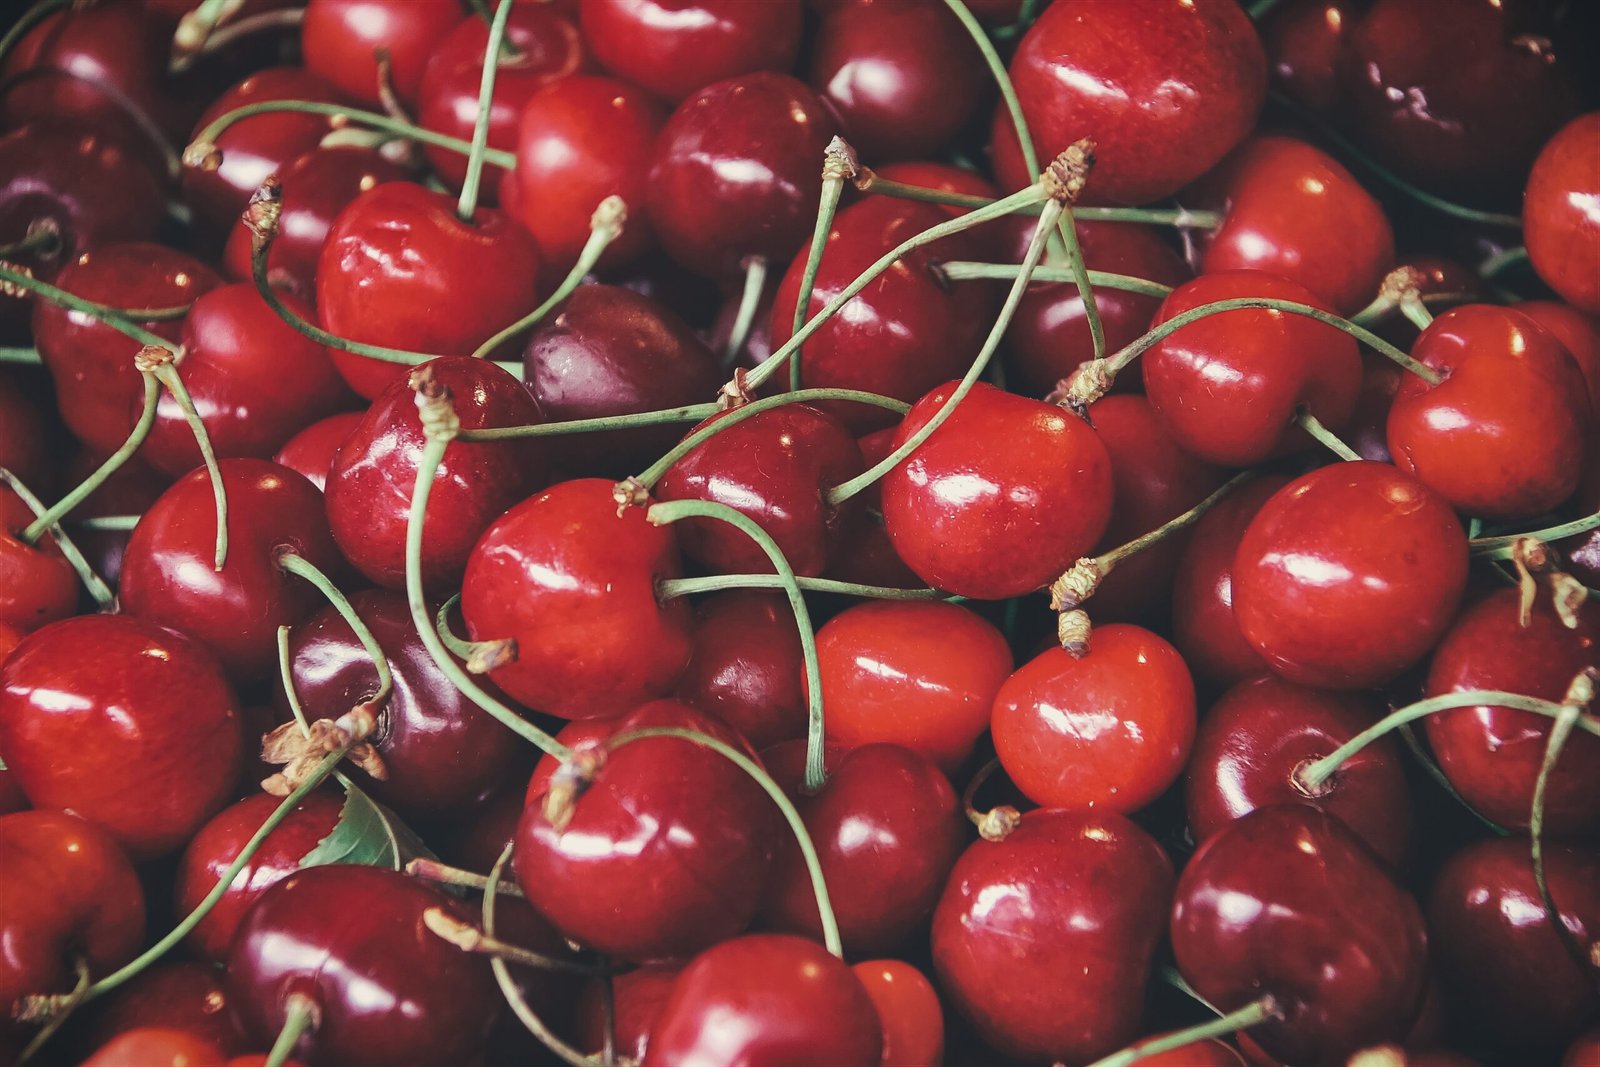 Protecting Your Cherries: How to prevent birds and other animals from eating your precious cherries.